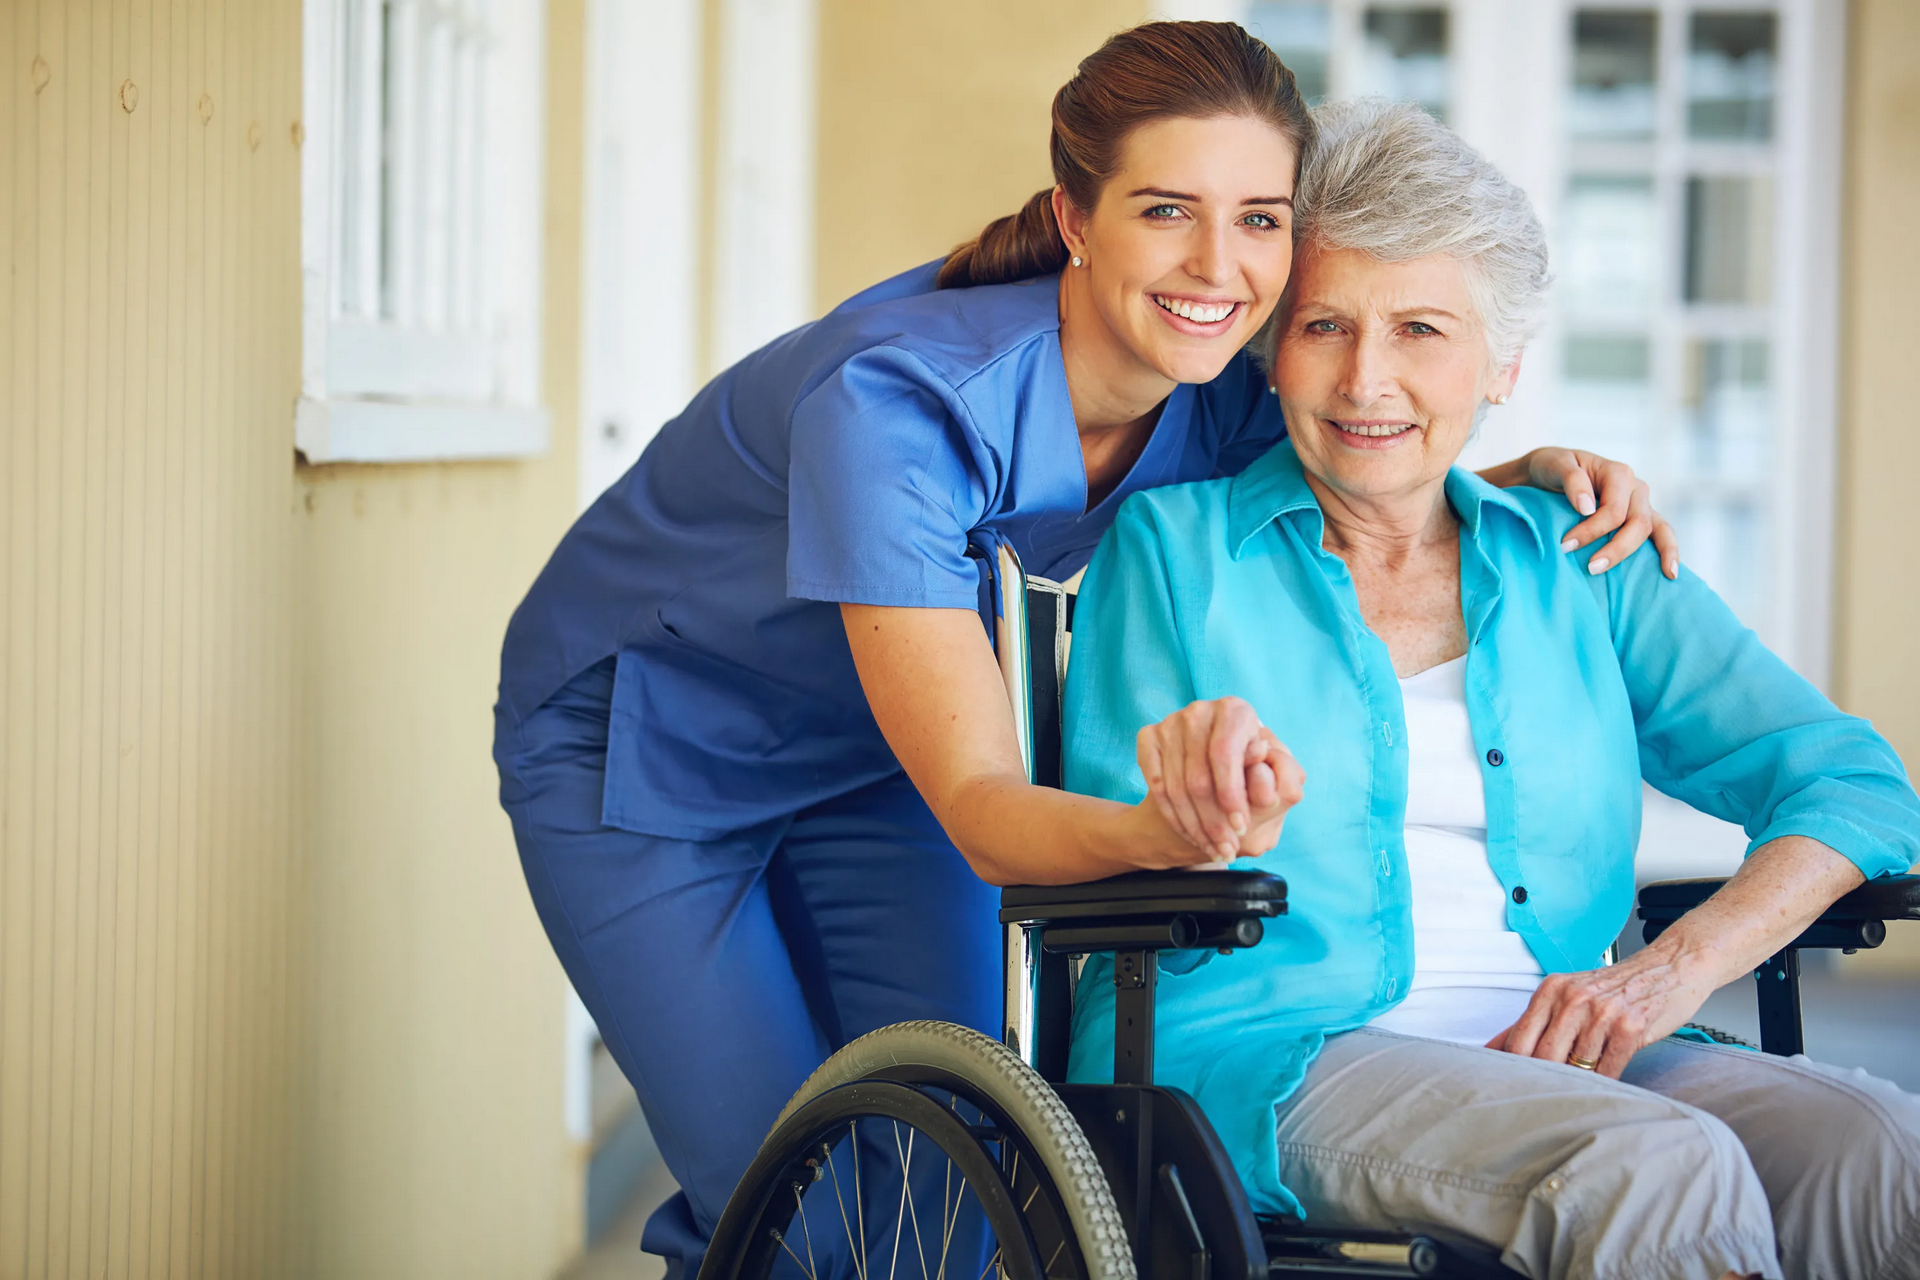 Growing Geriatric Population to Propel the Growth of the U.S. Home Healthcare Market